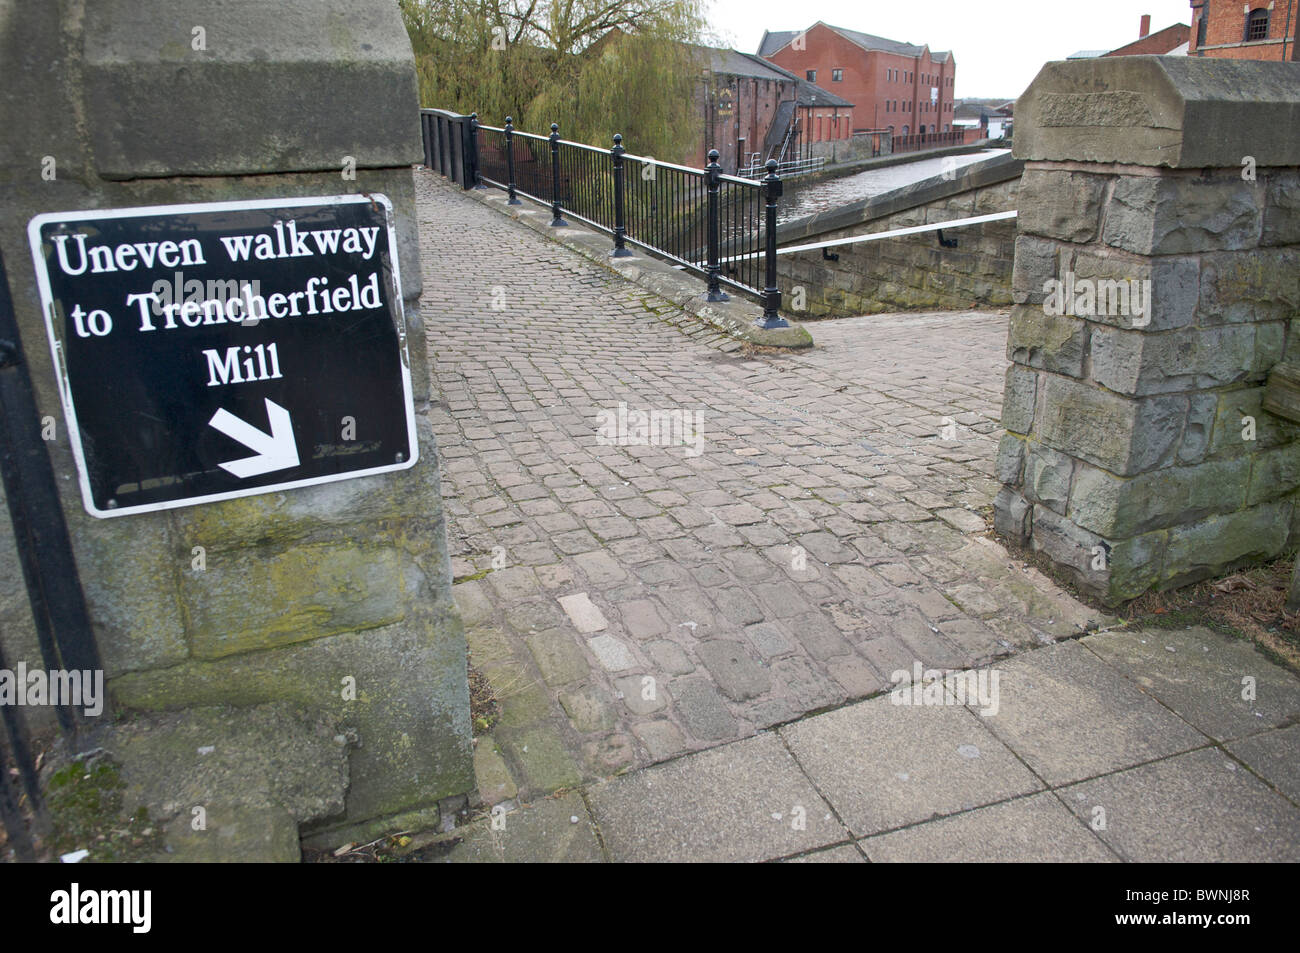 Cobbled bridge crossing the Leeds and Liverpool canal near Wigan Pier Stock Photo